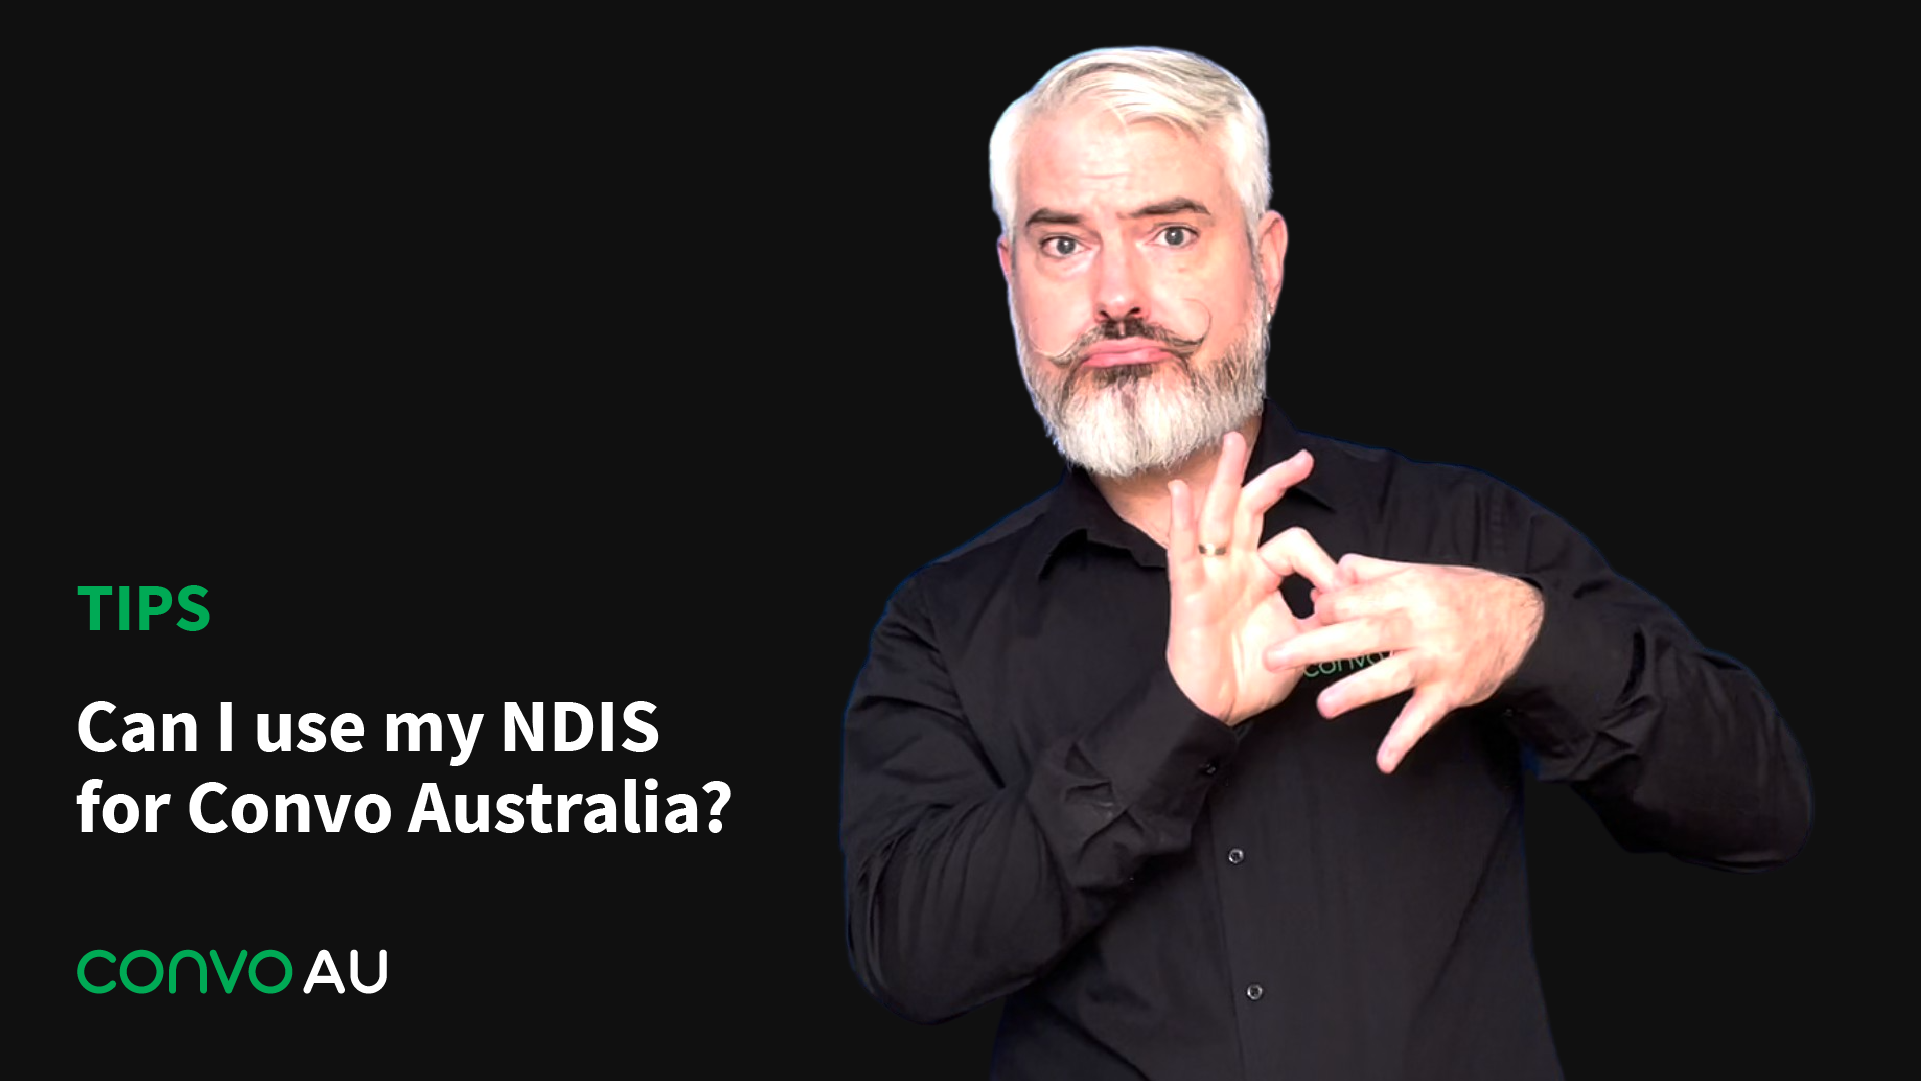 Tips: Can I use my NDIS for Convo Australia?